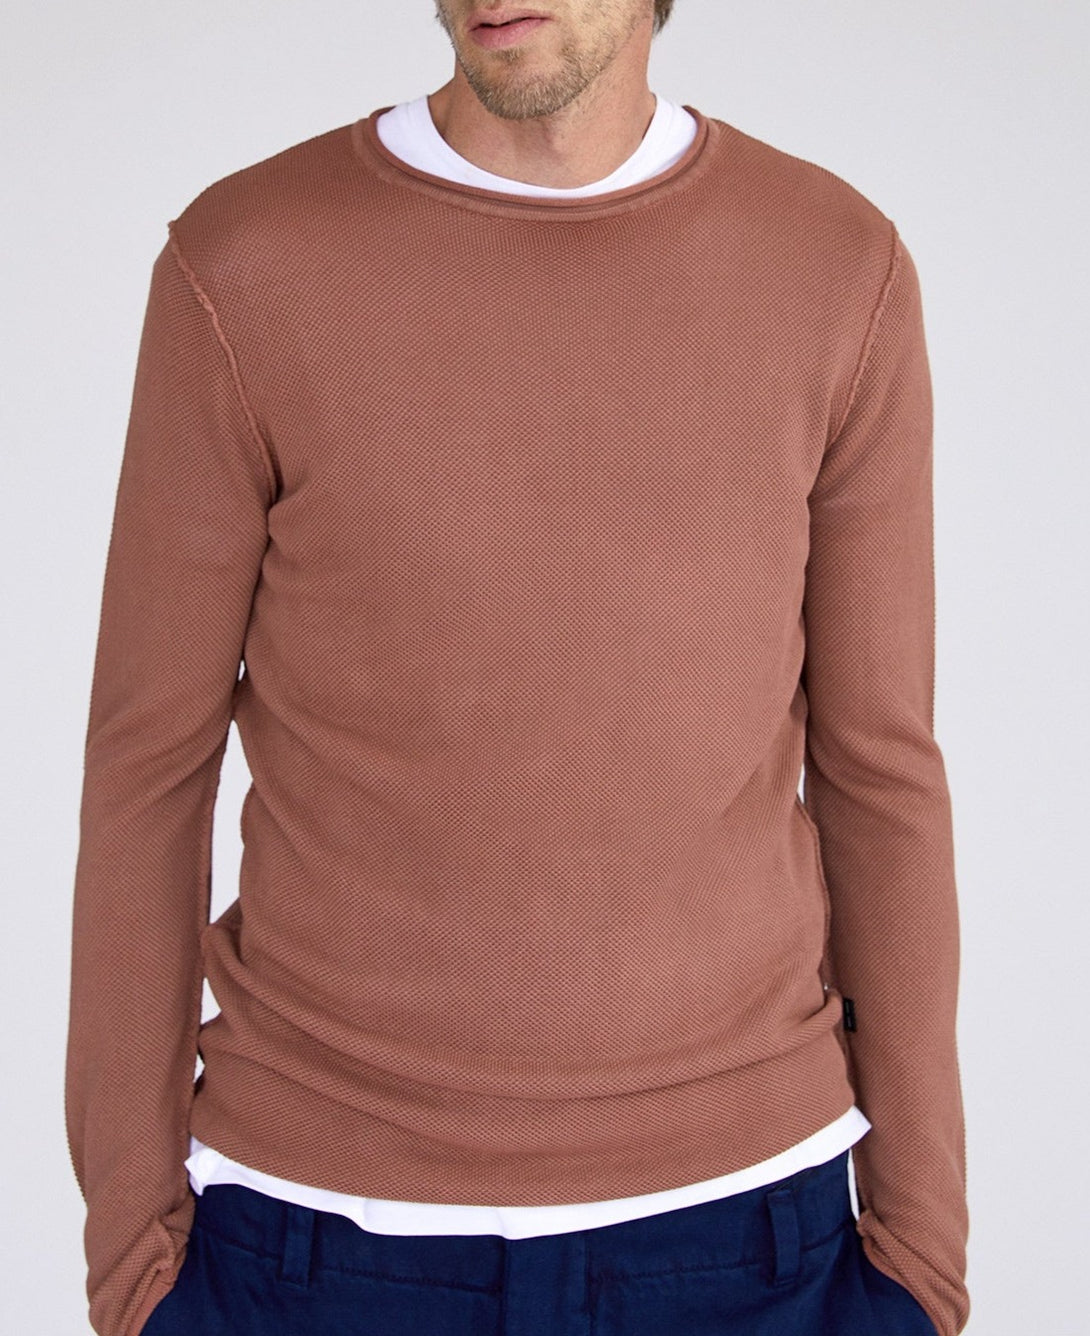 Men Long-Sleeve T-Shirt | Light Brown Viscose And Cotton Knitted T-Shirt by Spanish designer Adolfo Dominguez